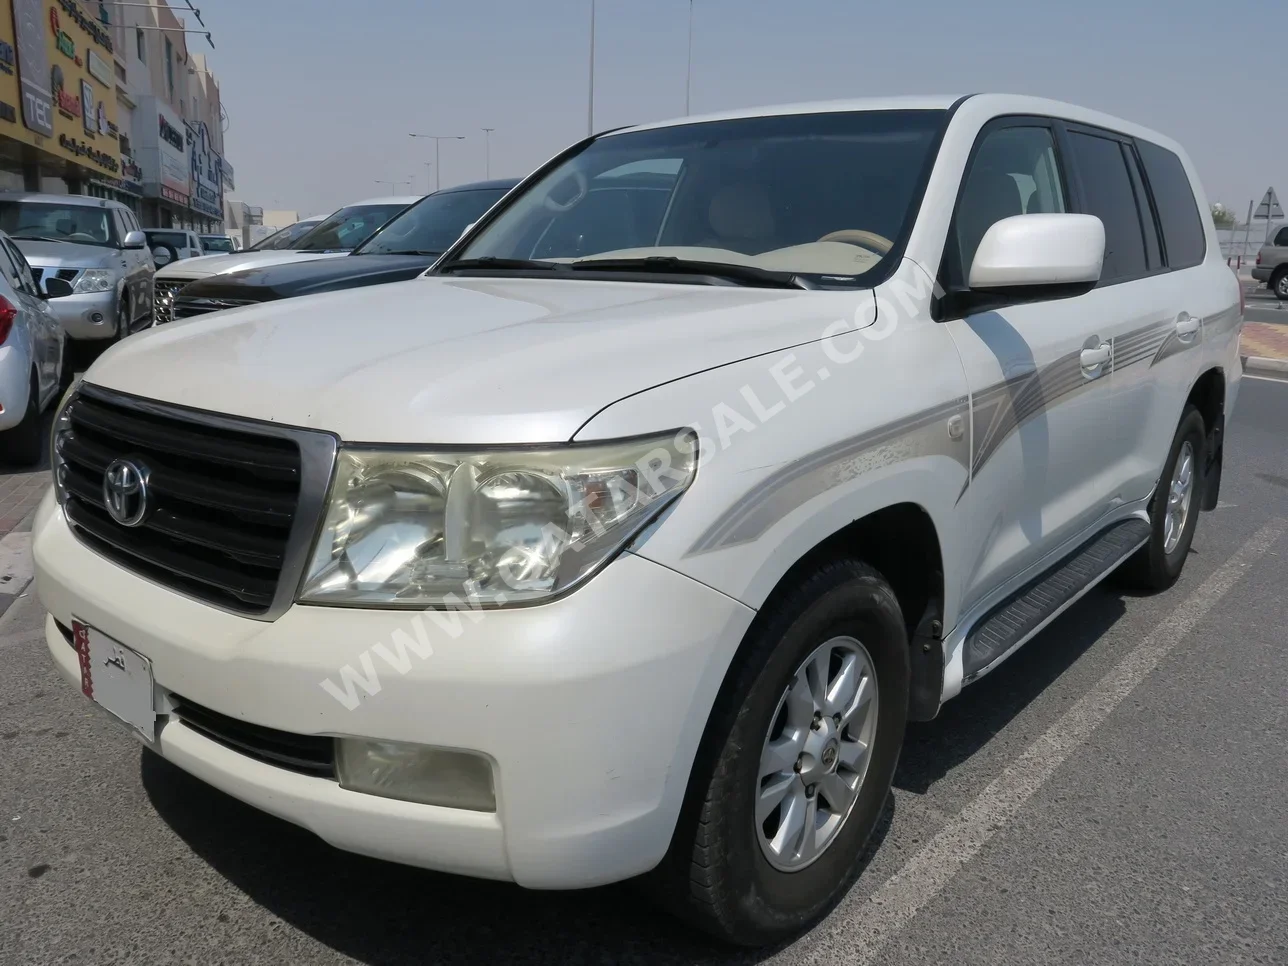 Toyota  Land Cruiser  G  2010  Automatic  500,000 Km  6 Cylinder  Four Wheel Drive (4WD)  SUV  White